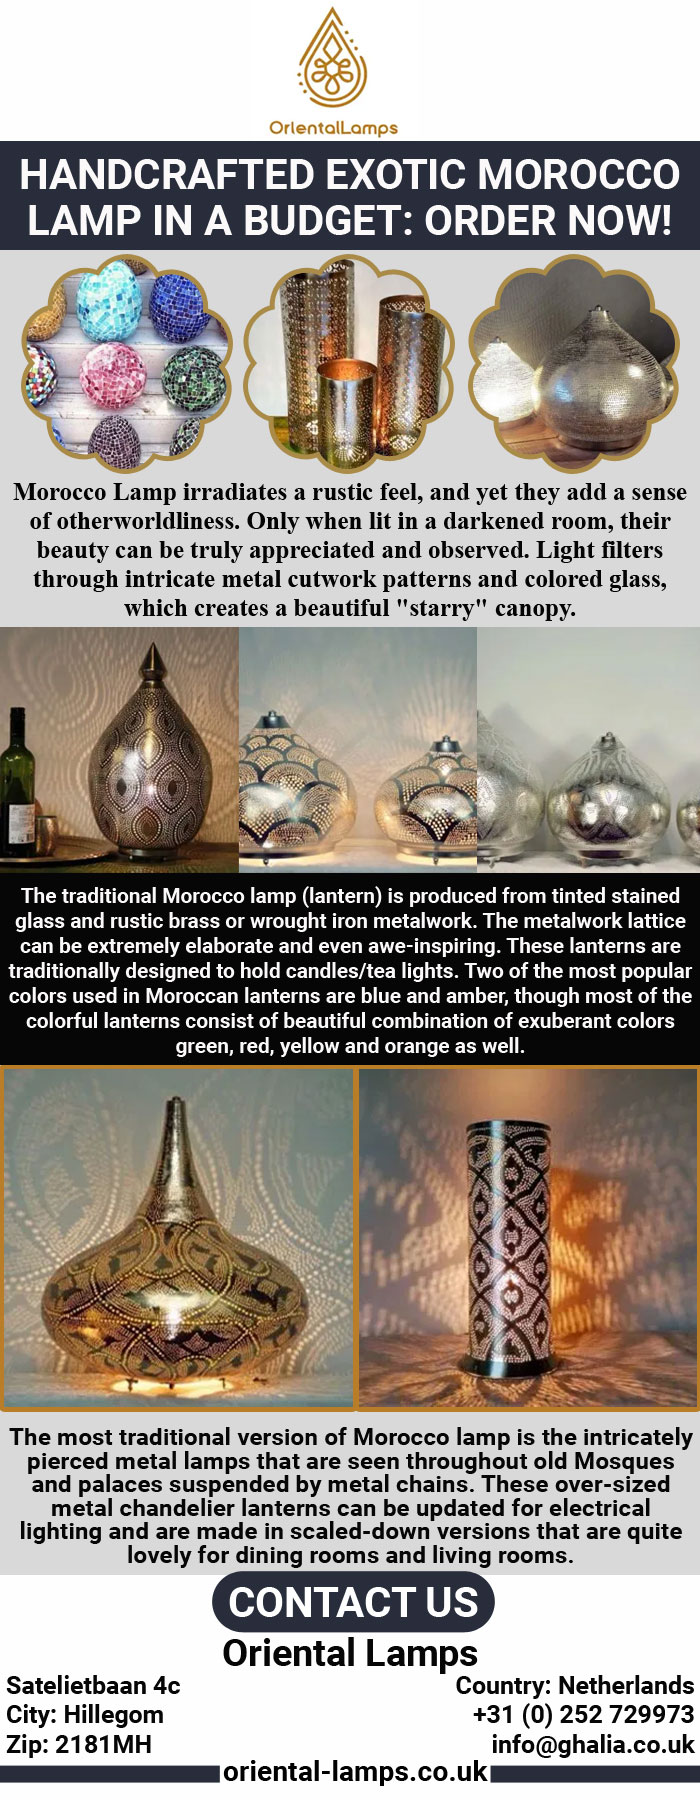 Handcrafted Exotic Morocco Lamp in a Budget Order Now!.jpg  by orientallamps